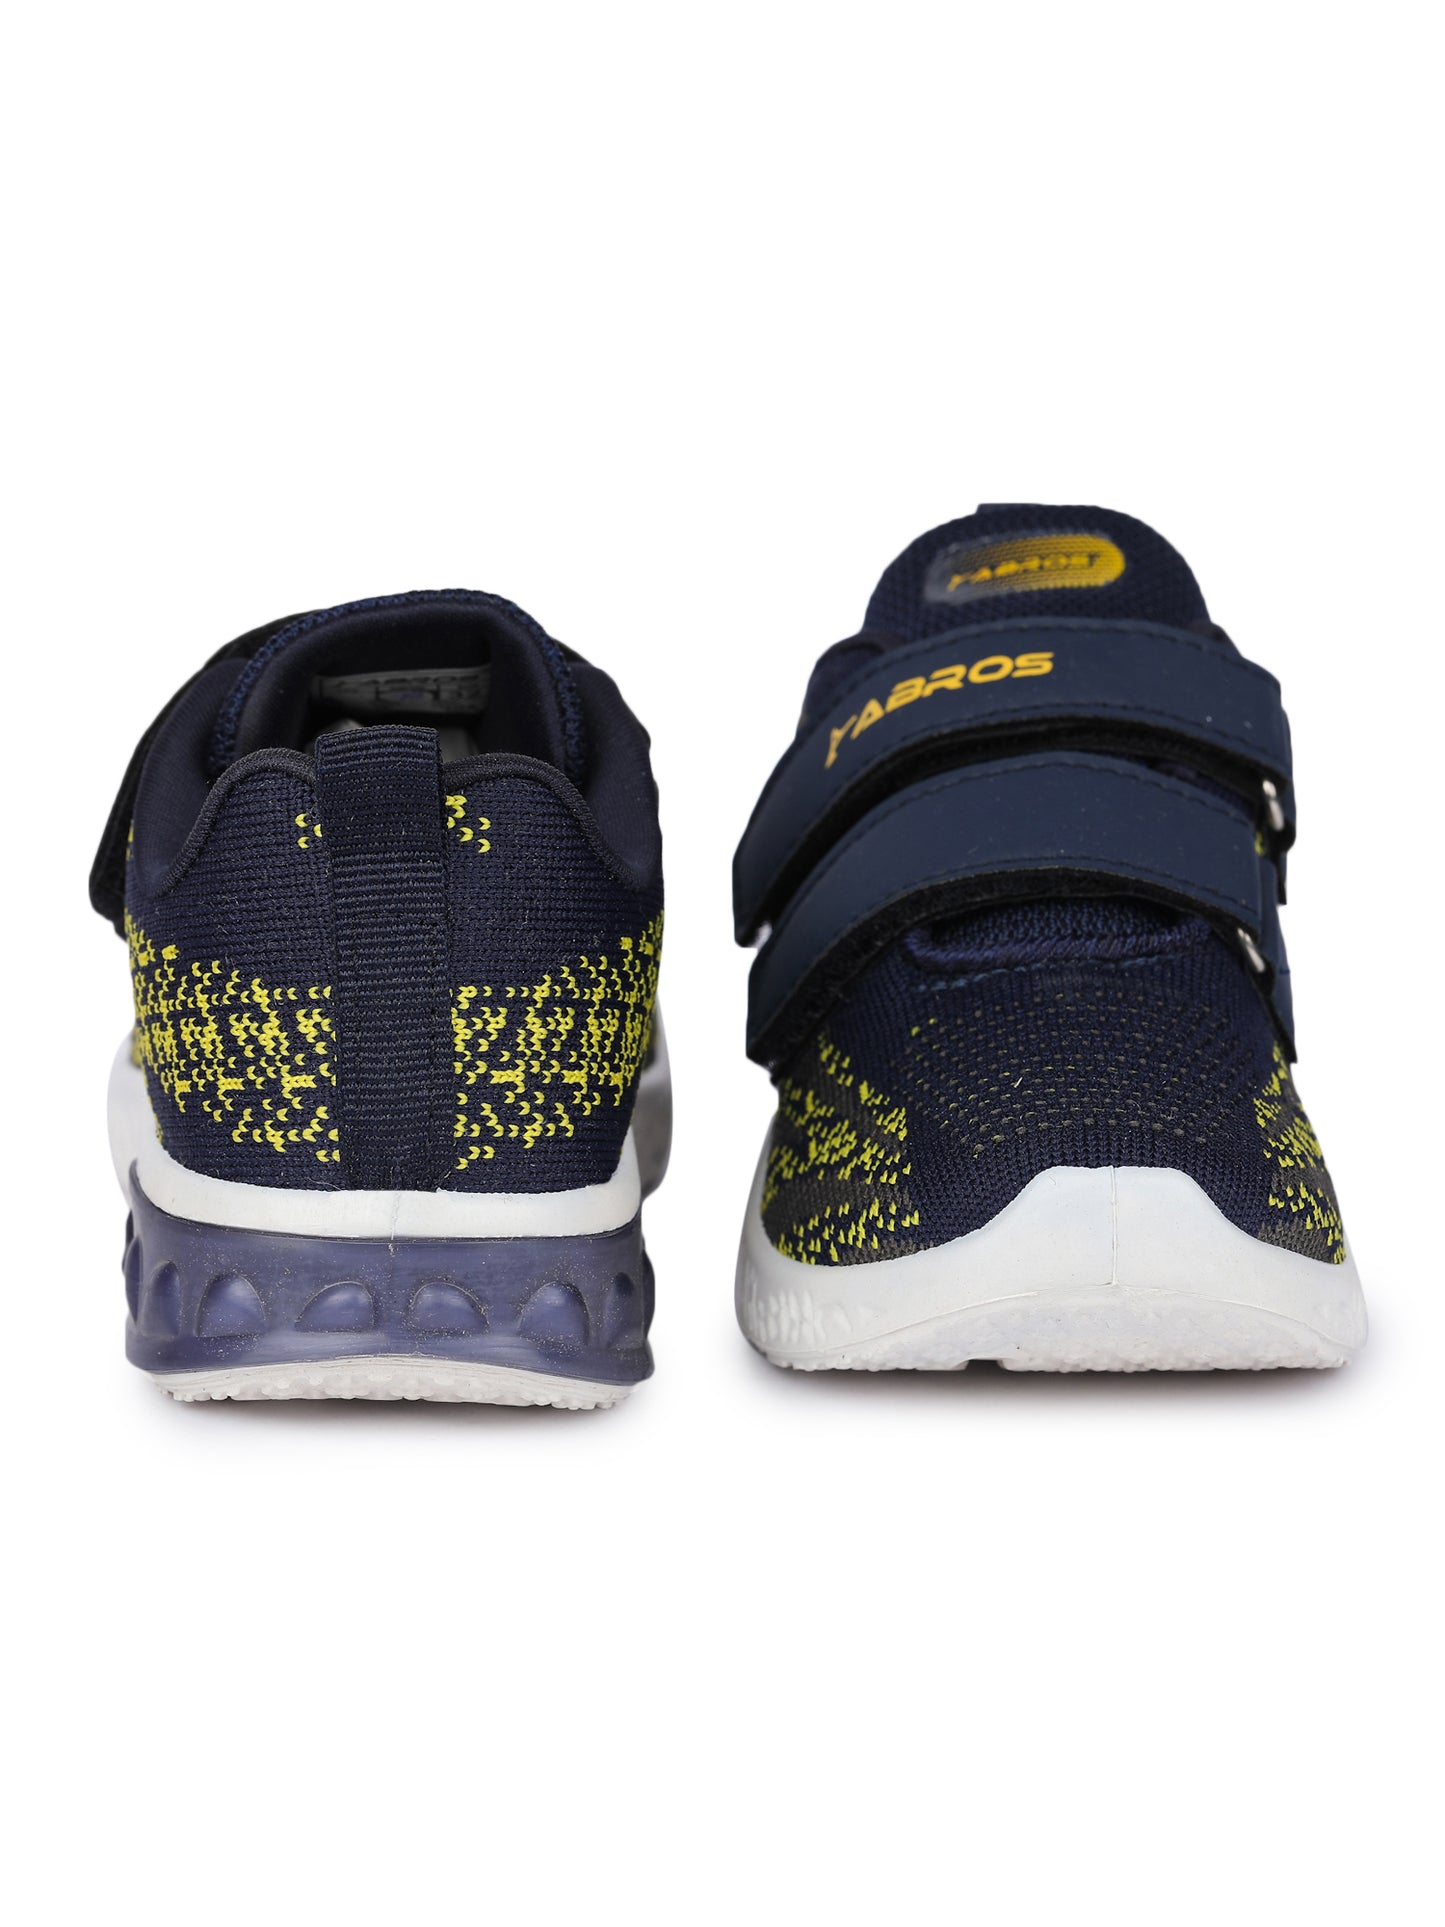 ABROS SPINK SPORTS SHOES FOR KIDS